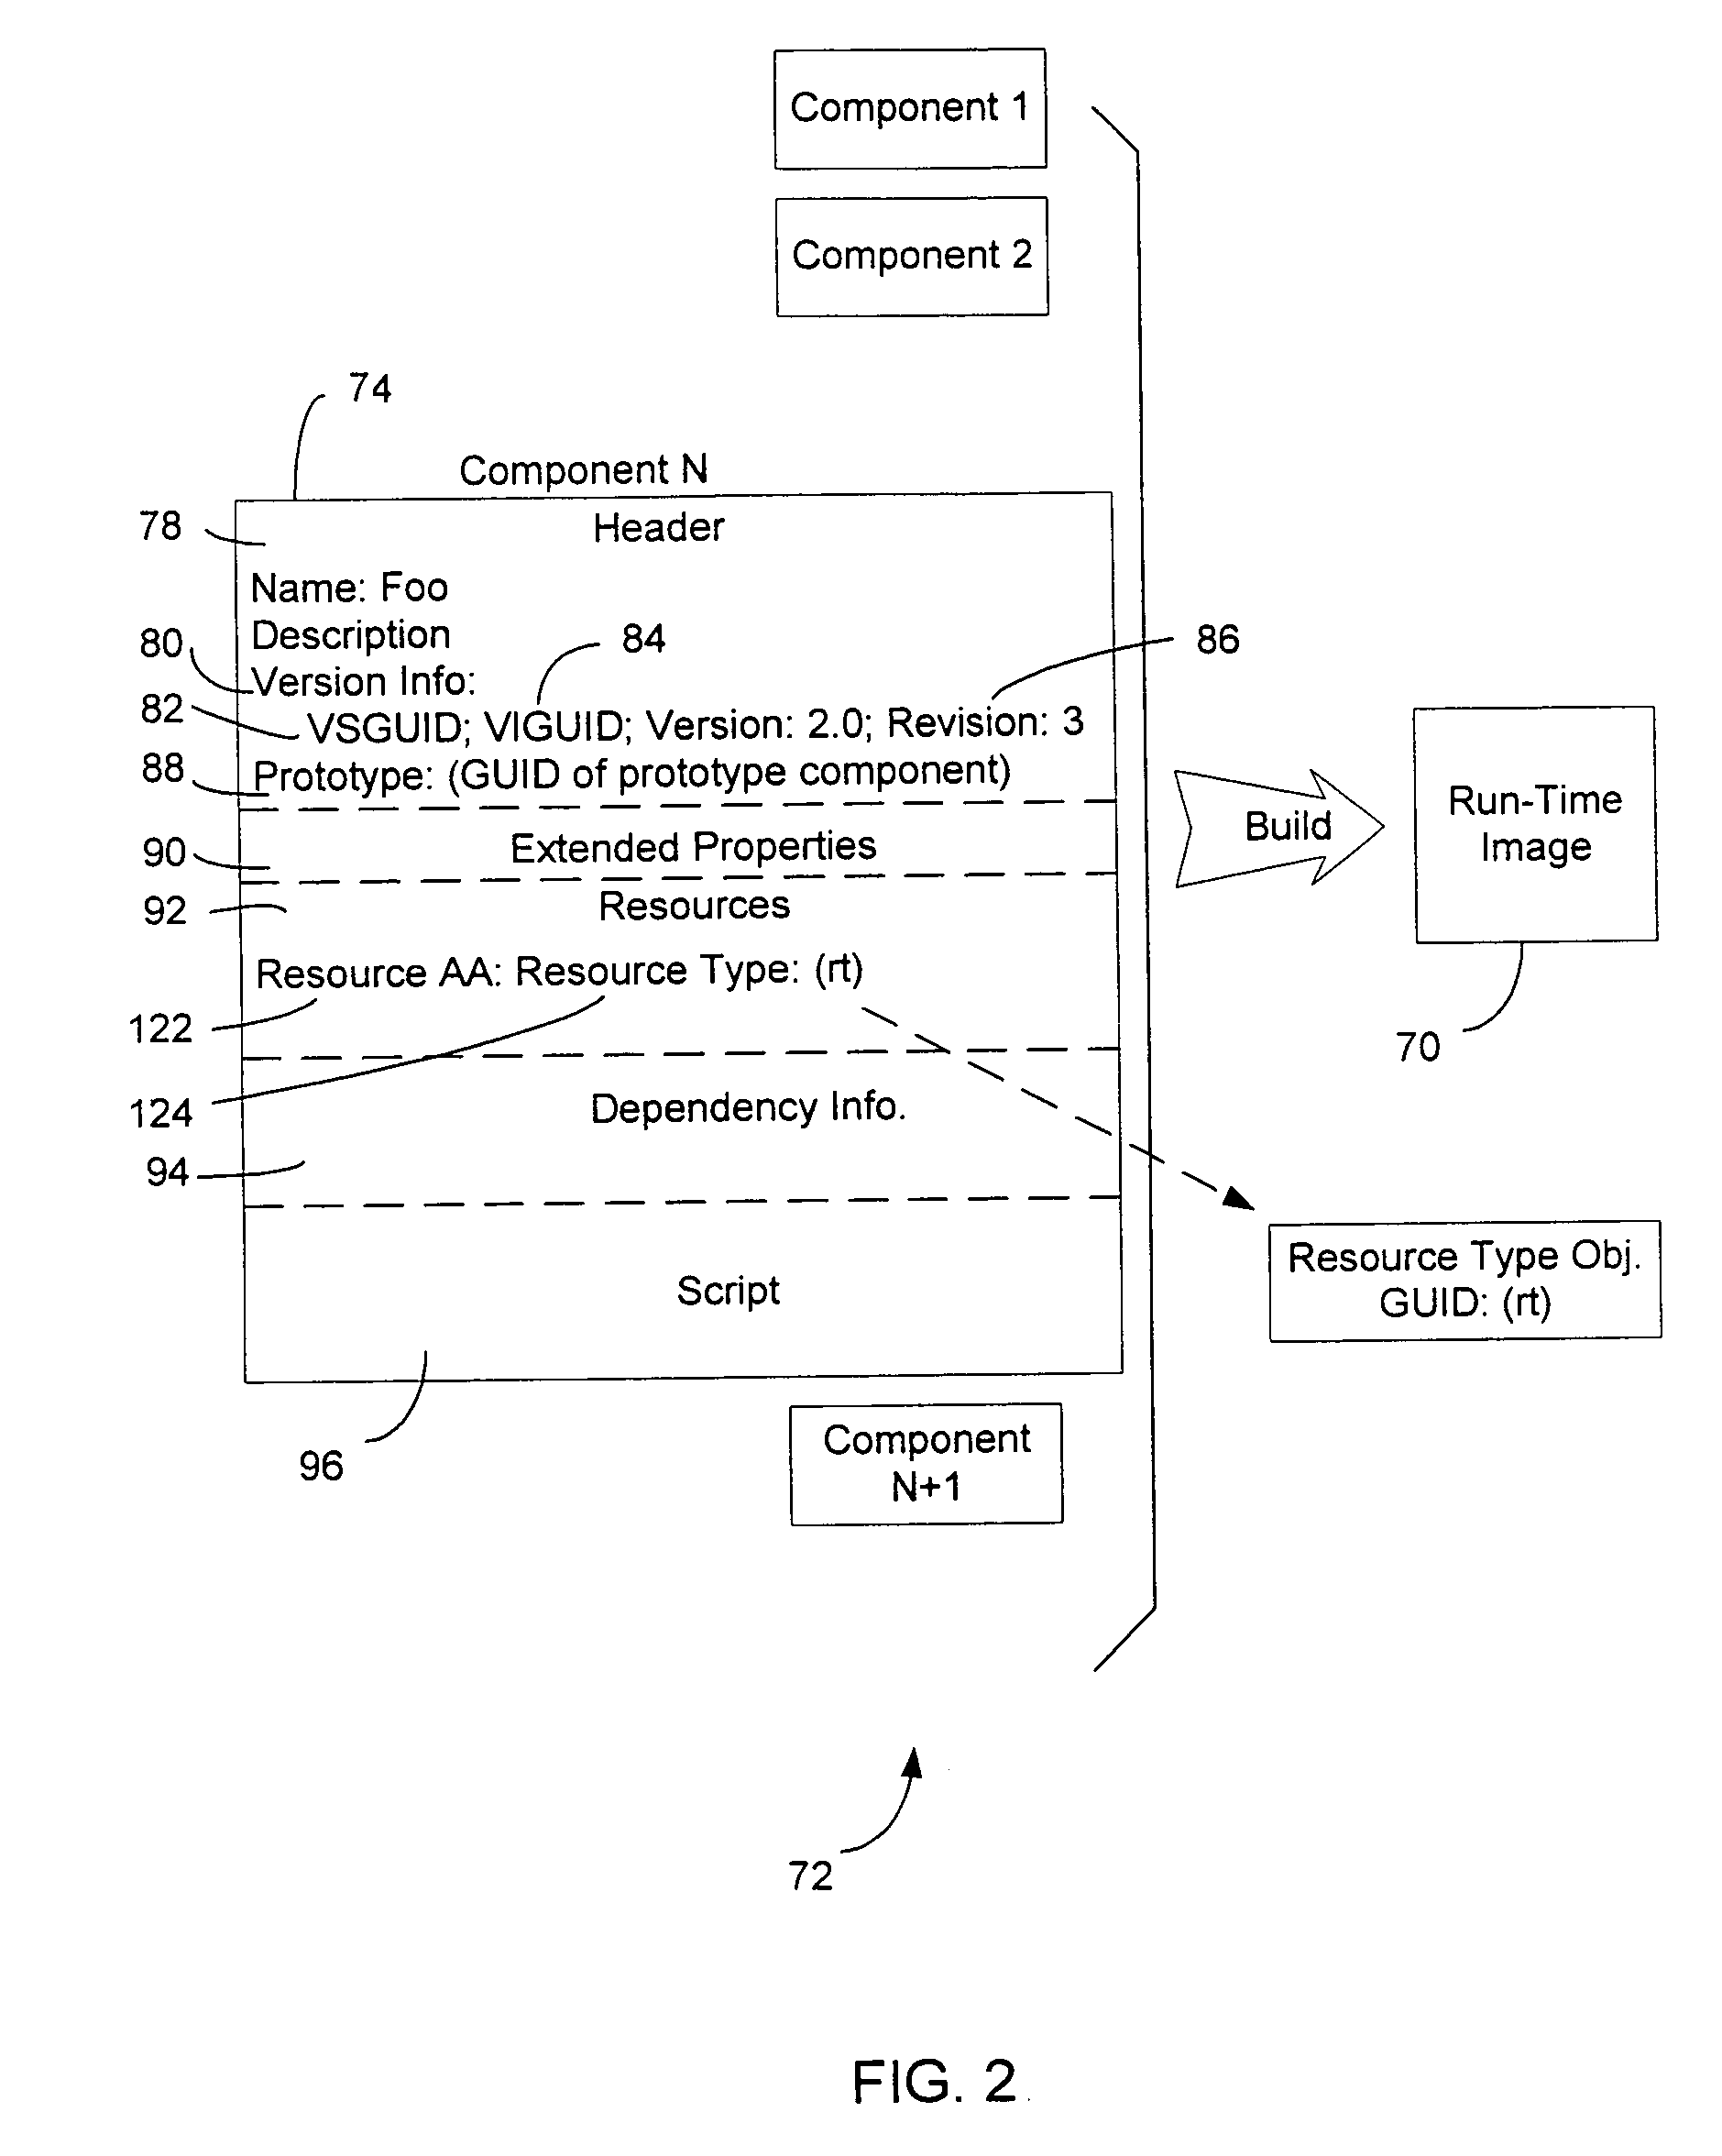 System and method for building a run-time image from components of a software program